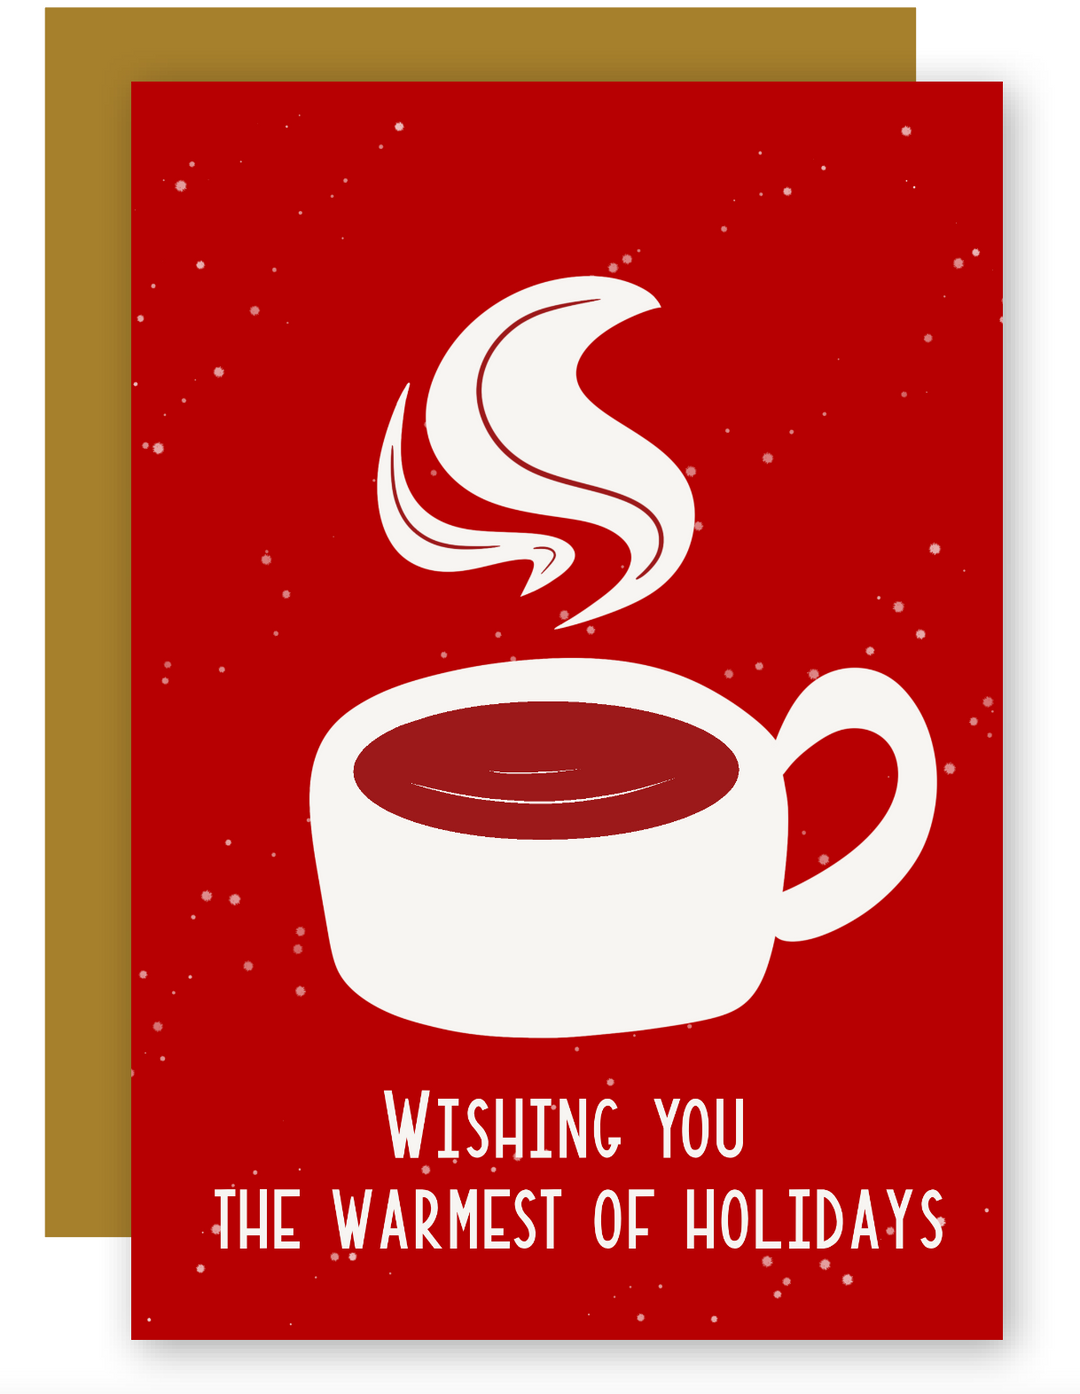 Warming Holiday Mug on Solid Bright Color Backgrounds Greeting Cards + Matching Envelope, Blank Inside - Assorted (Winter Wishes)